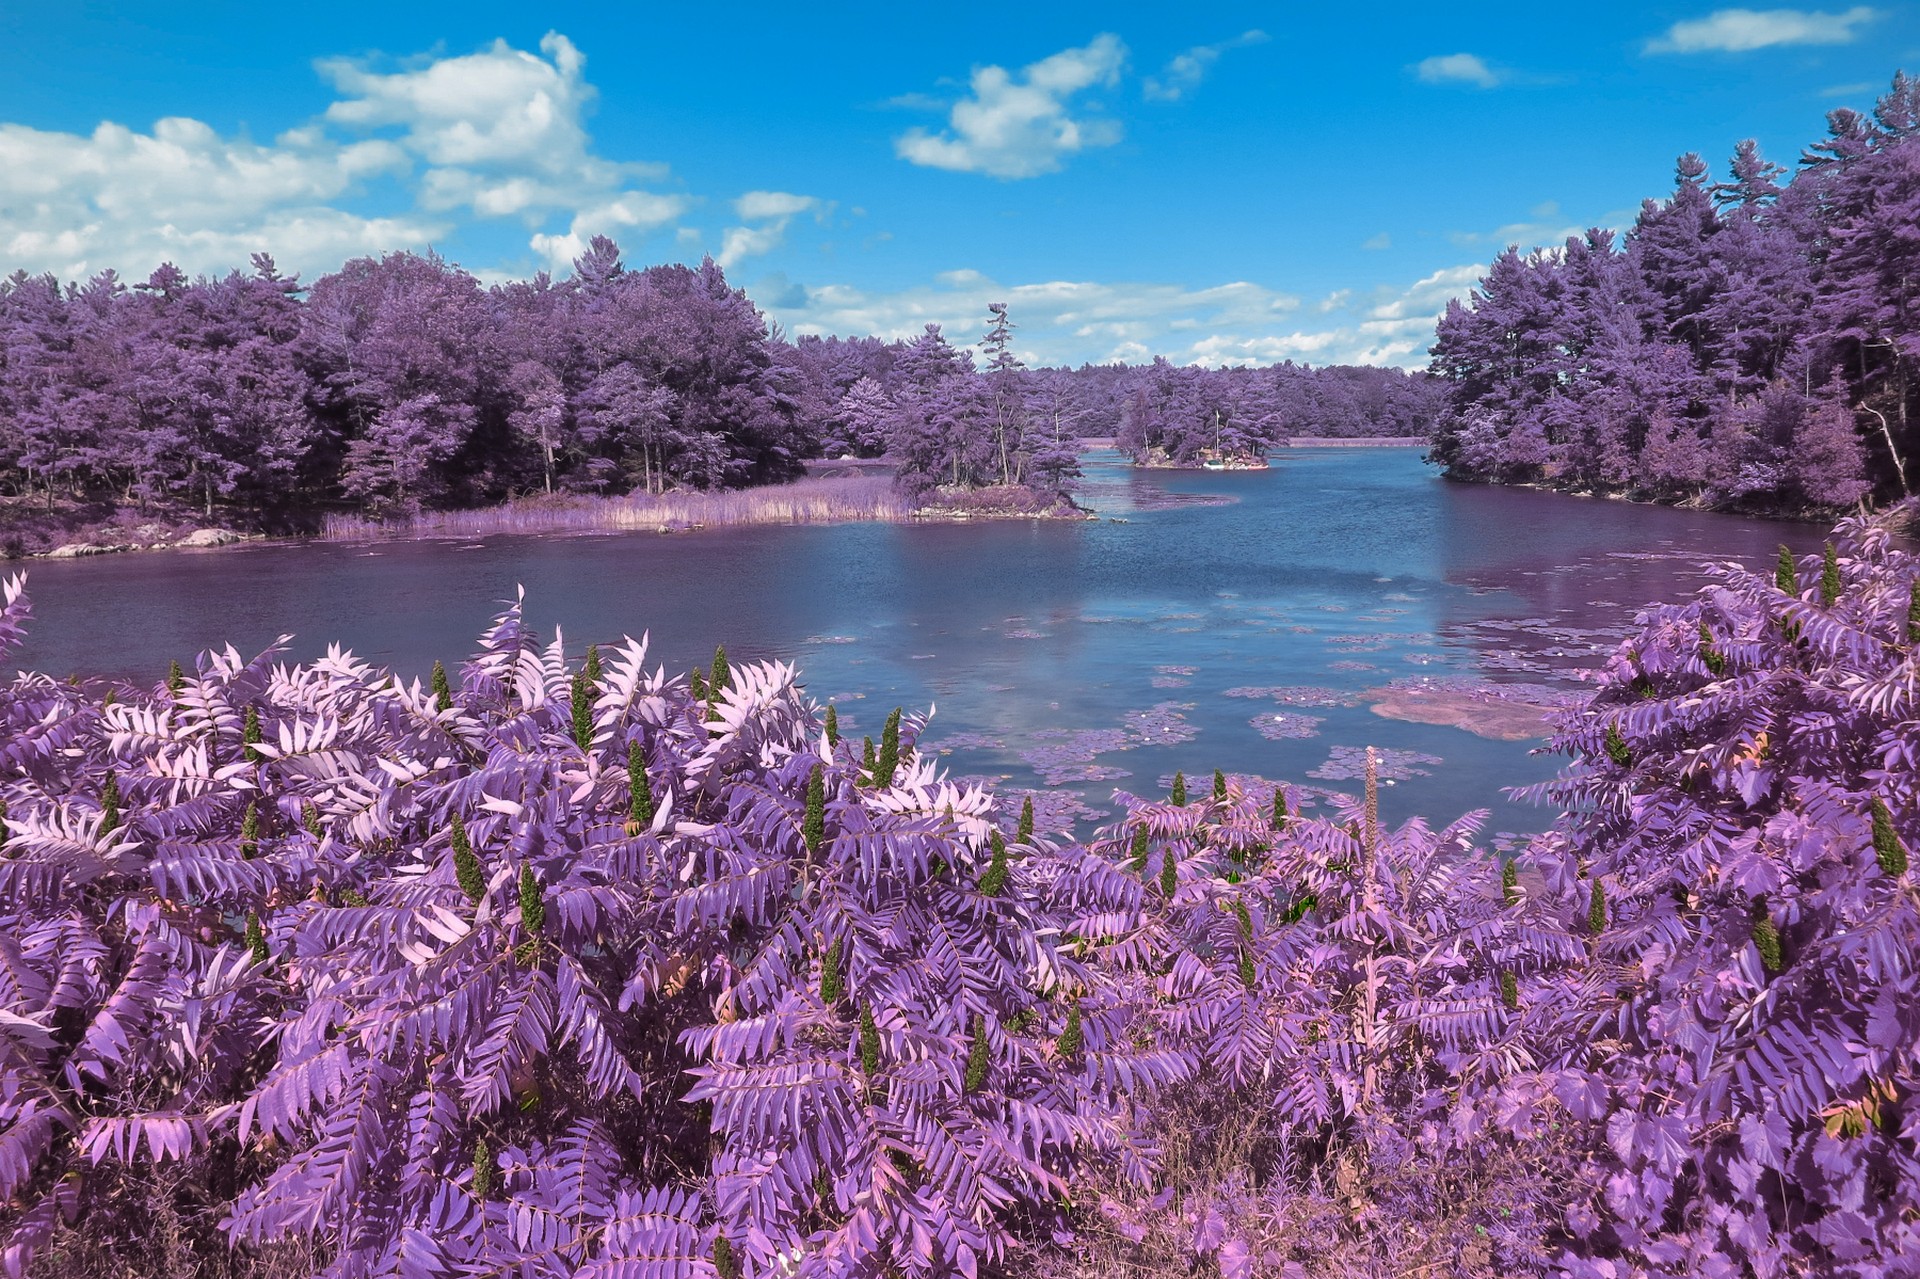 Thousand islands scenery – lavender